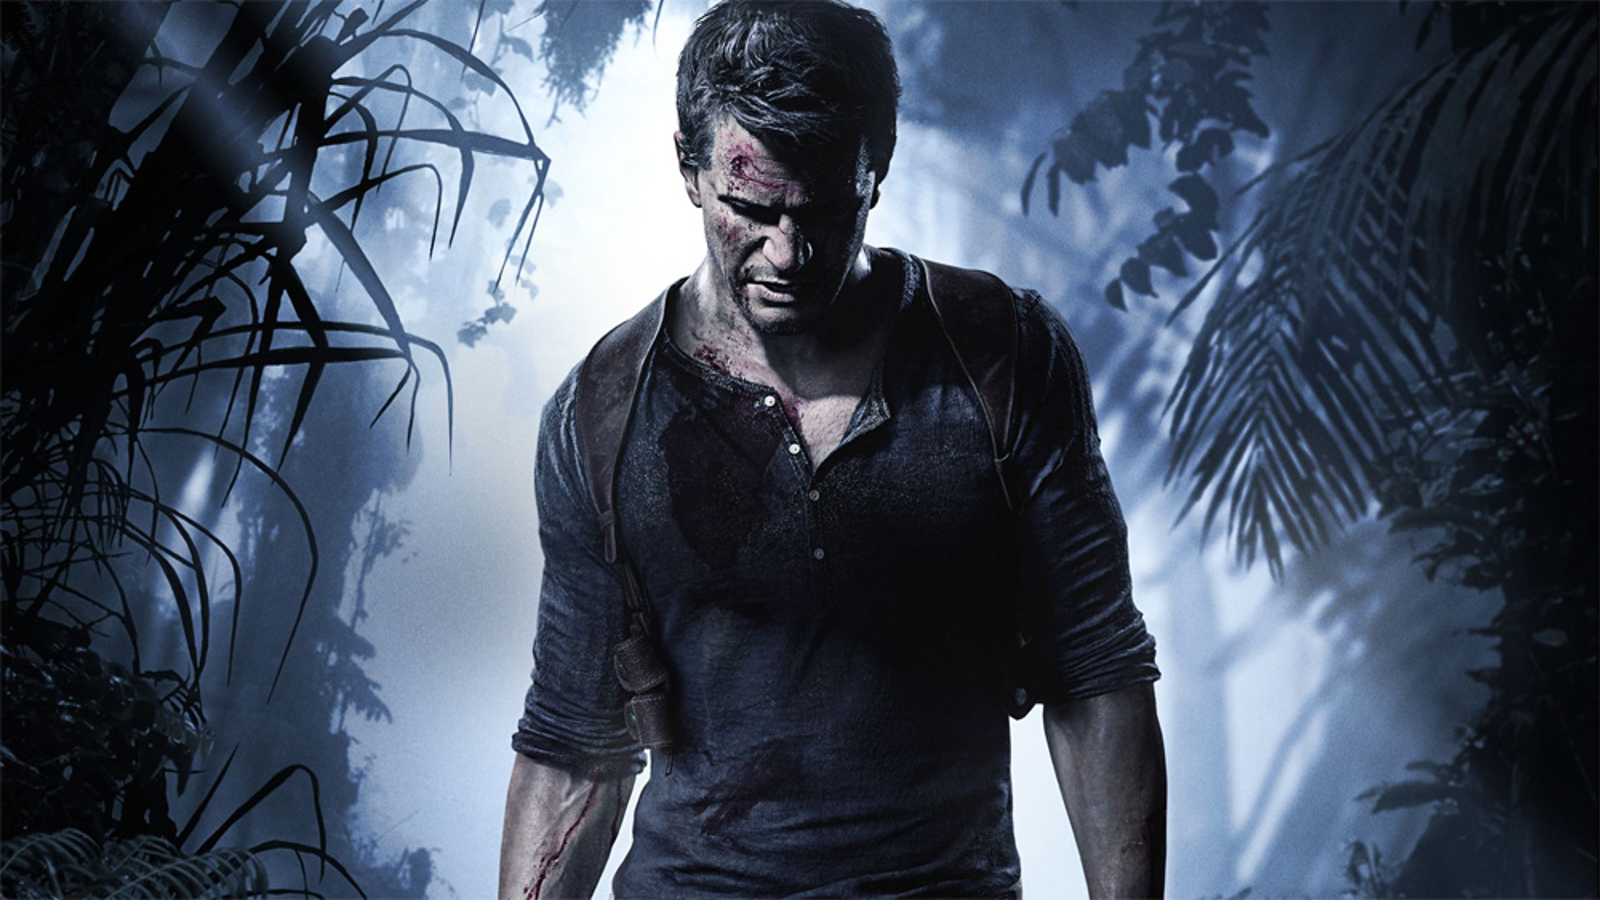 Walkthrough - Chapters - Uncharted 4: A Thief's End Guide - IGN